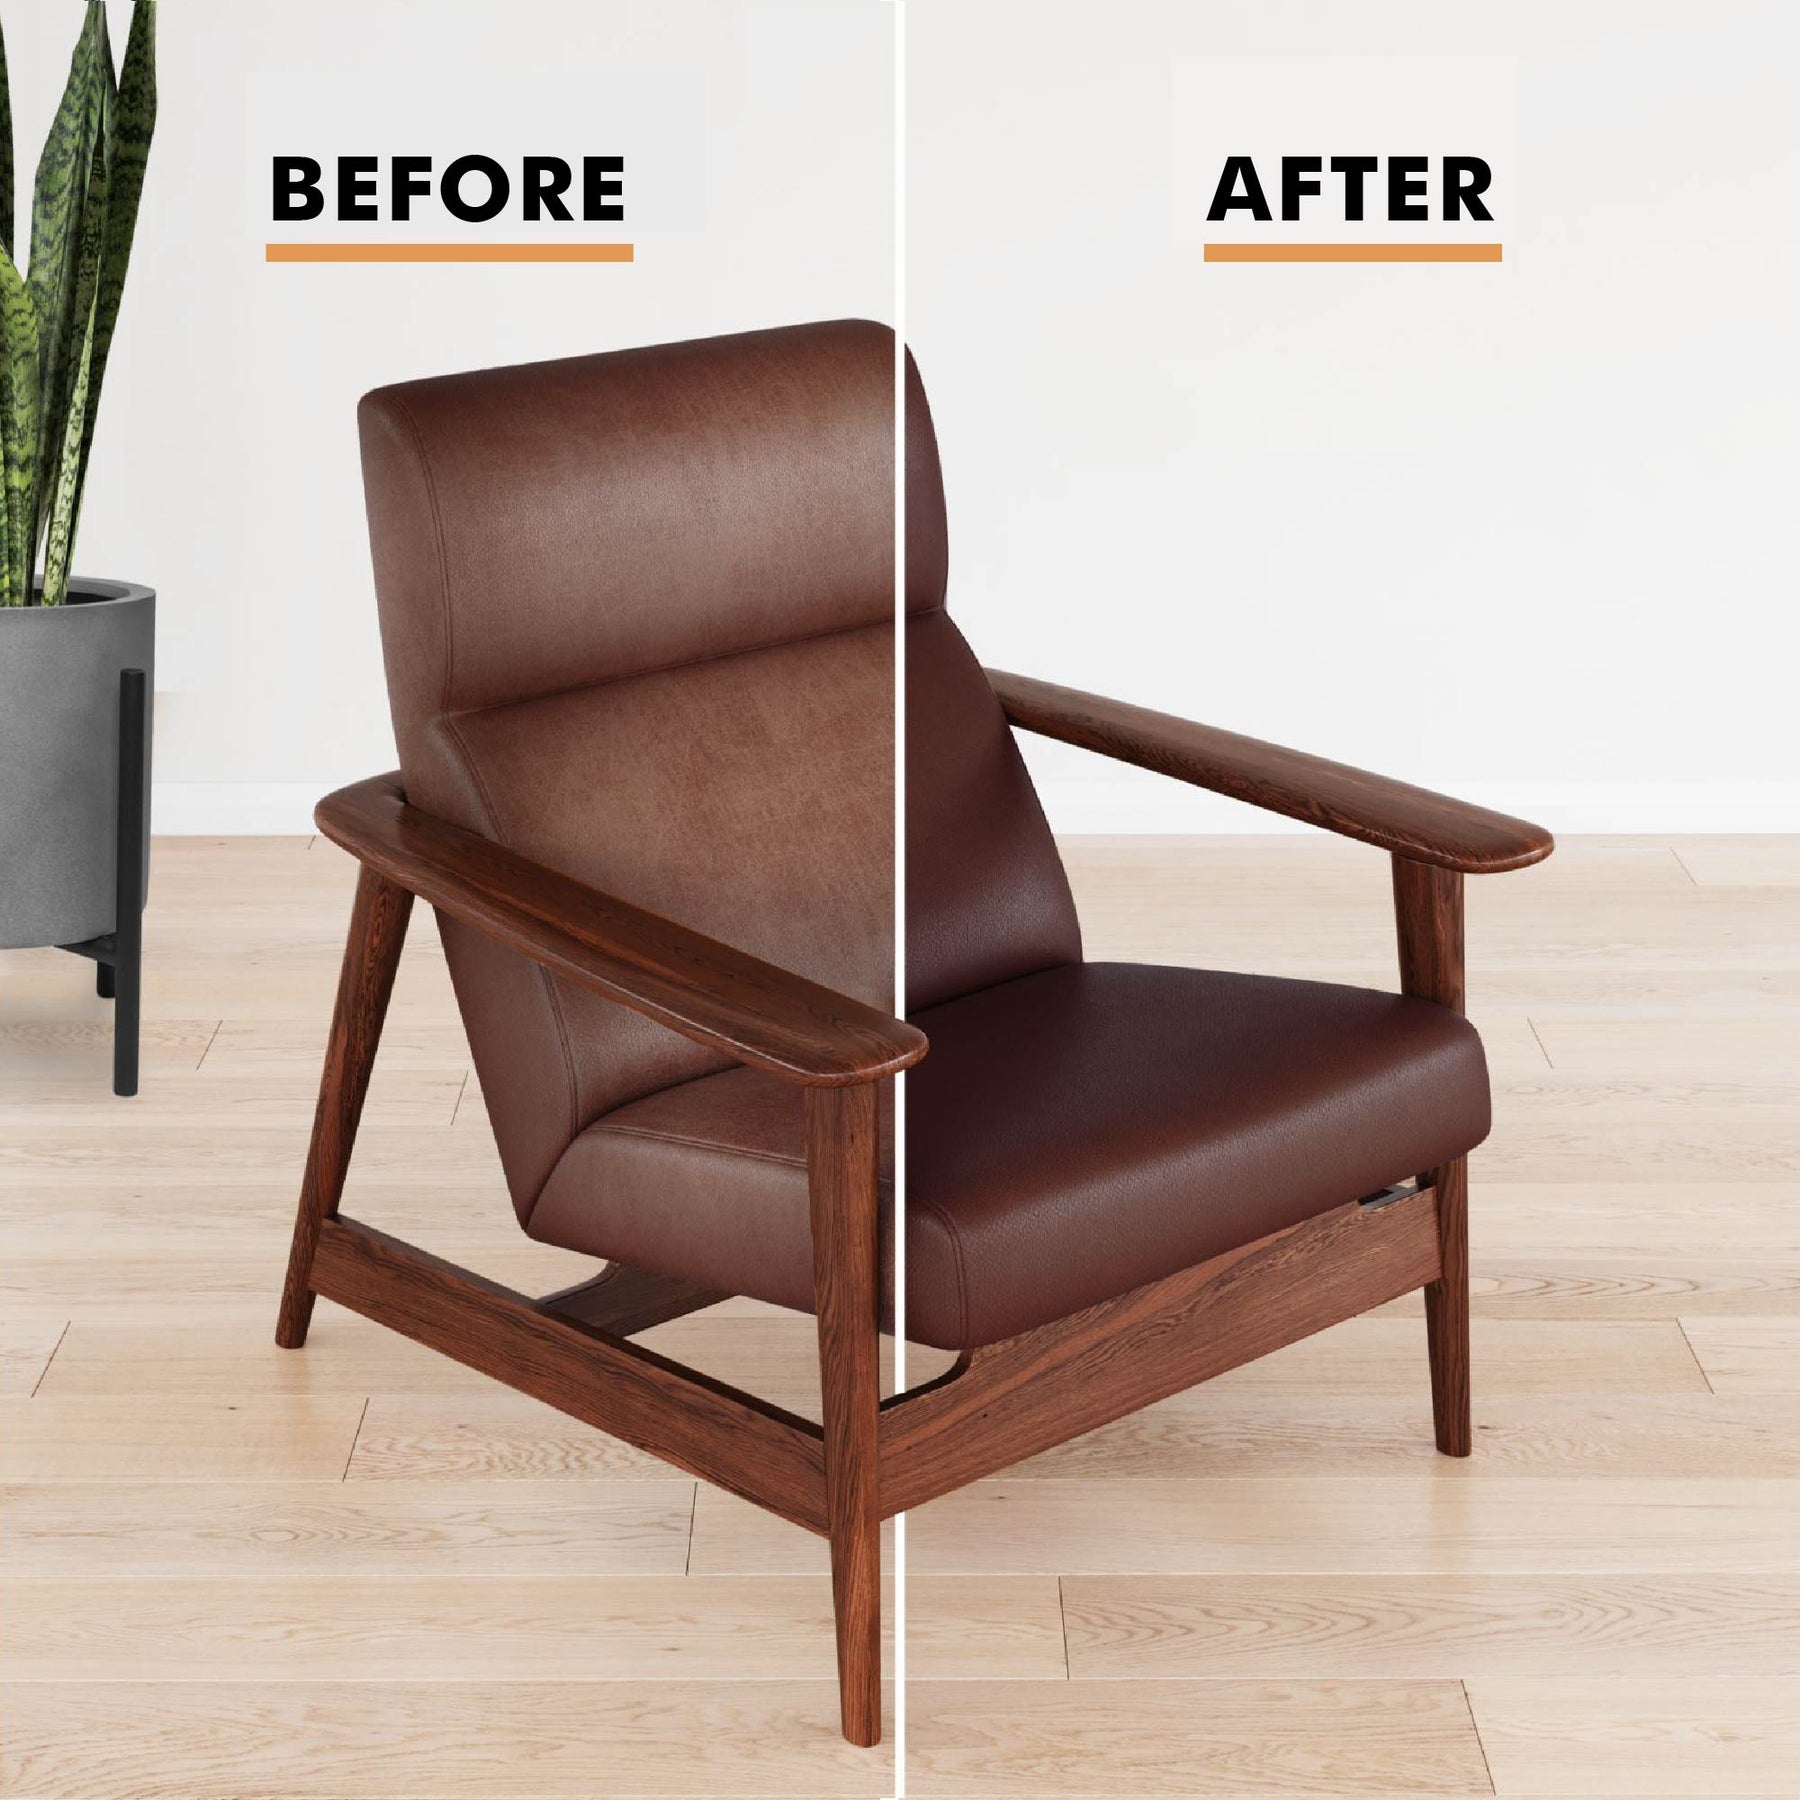 Furniture Restoration with Leather Paint – Colorbond Paint